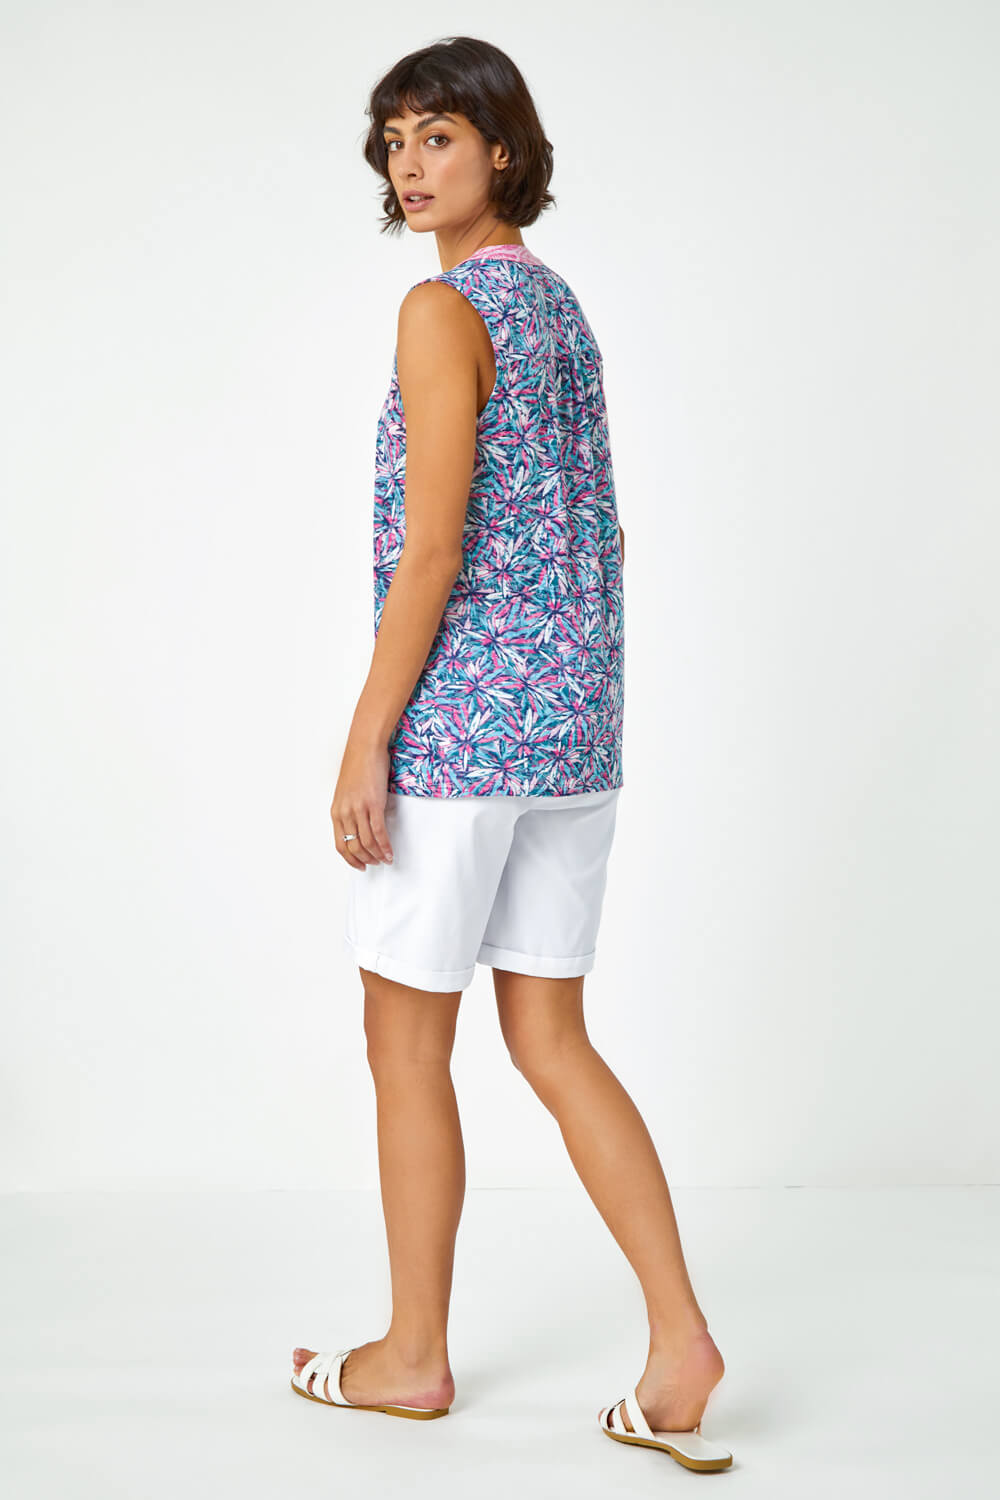 PINK Sleeveless Floral Print Top, Image 3 of 5